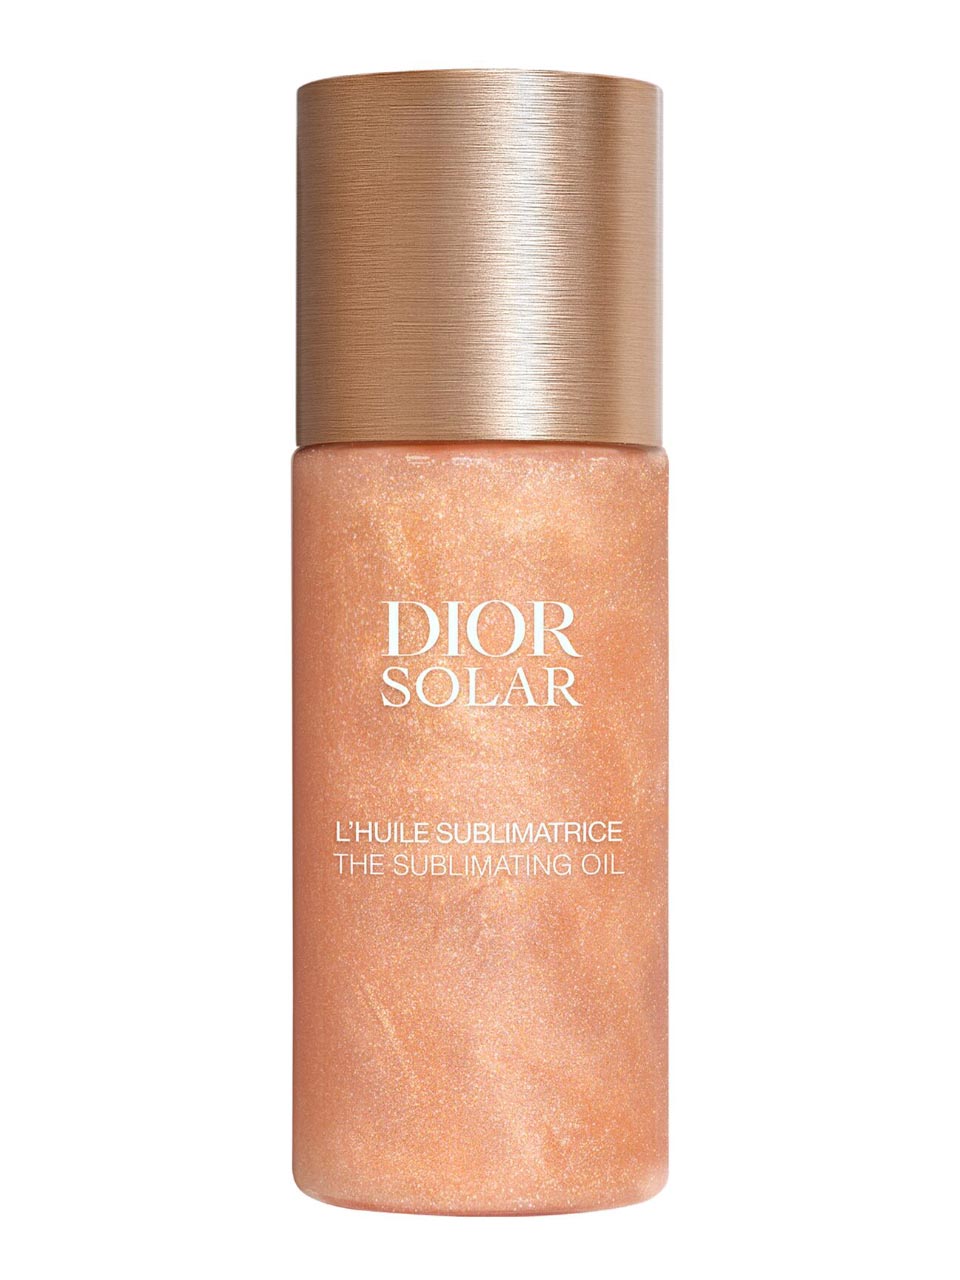 Dior Solar The Sublimating Oil 125 ml null - onesize - 1